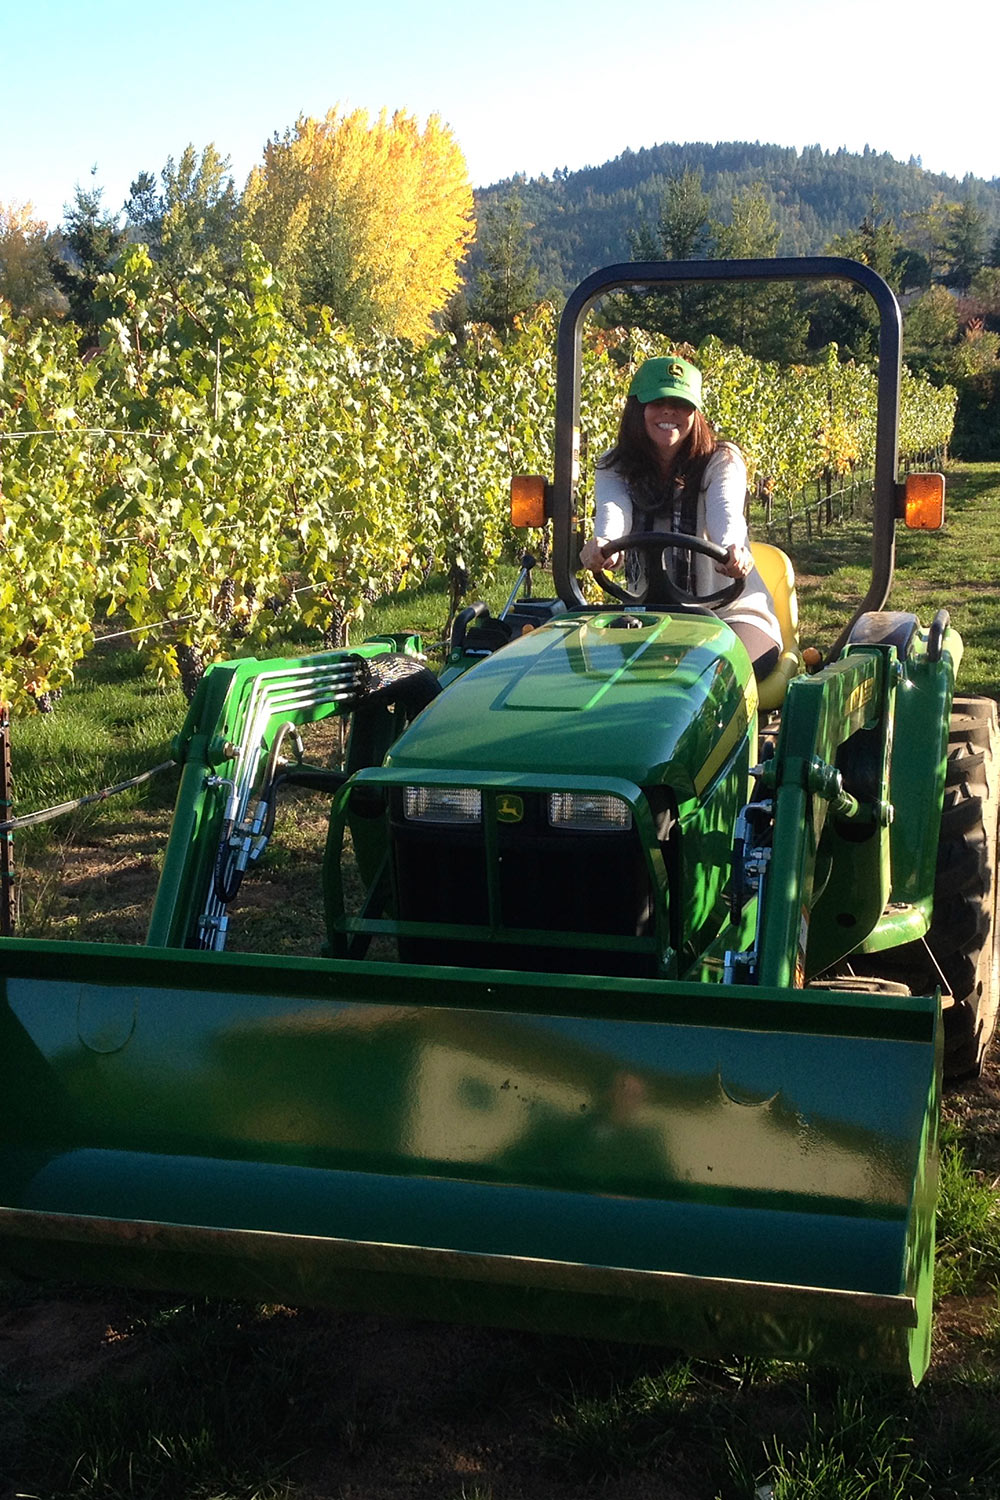 Driving the tractor through the vineyard